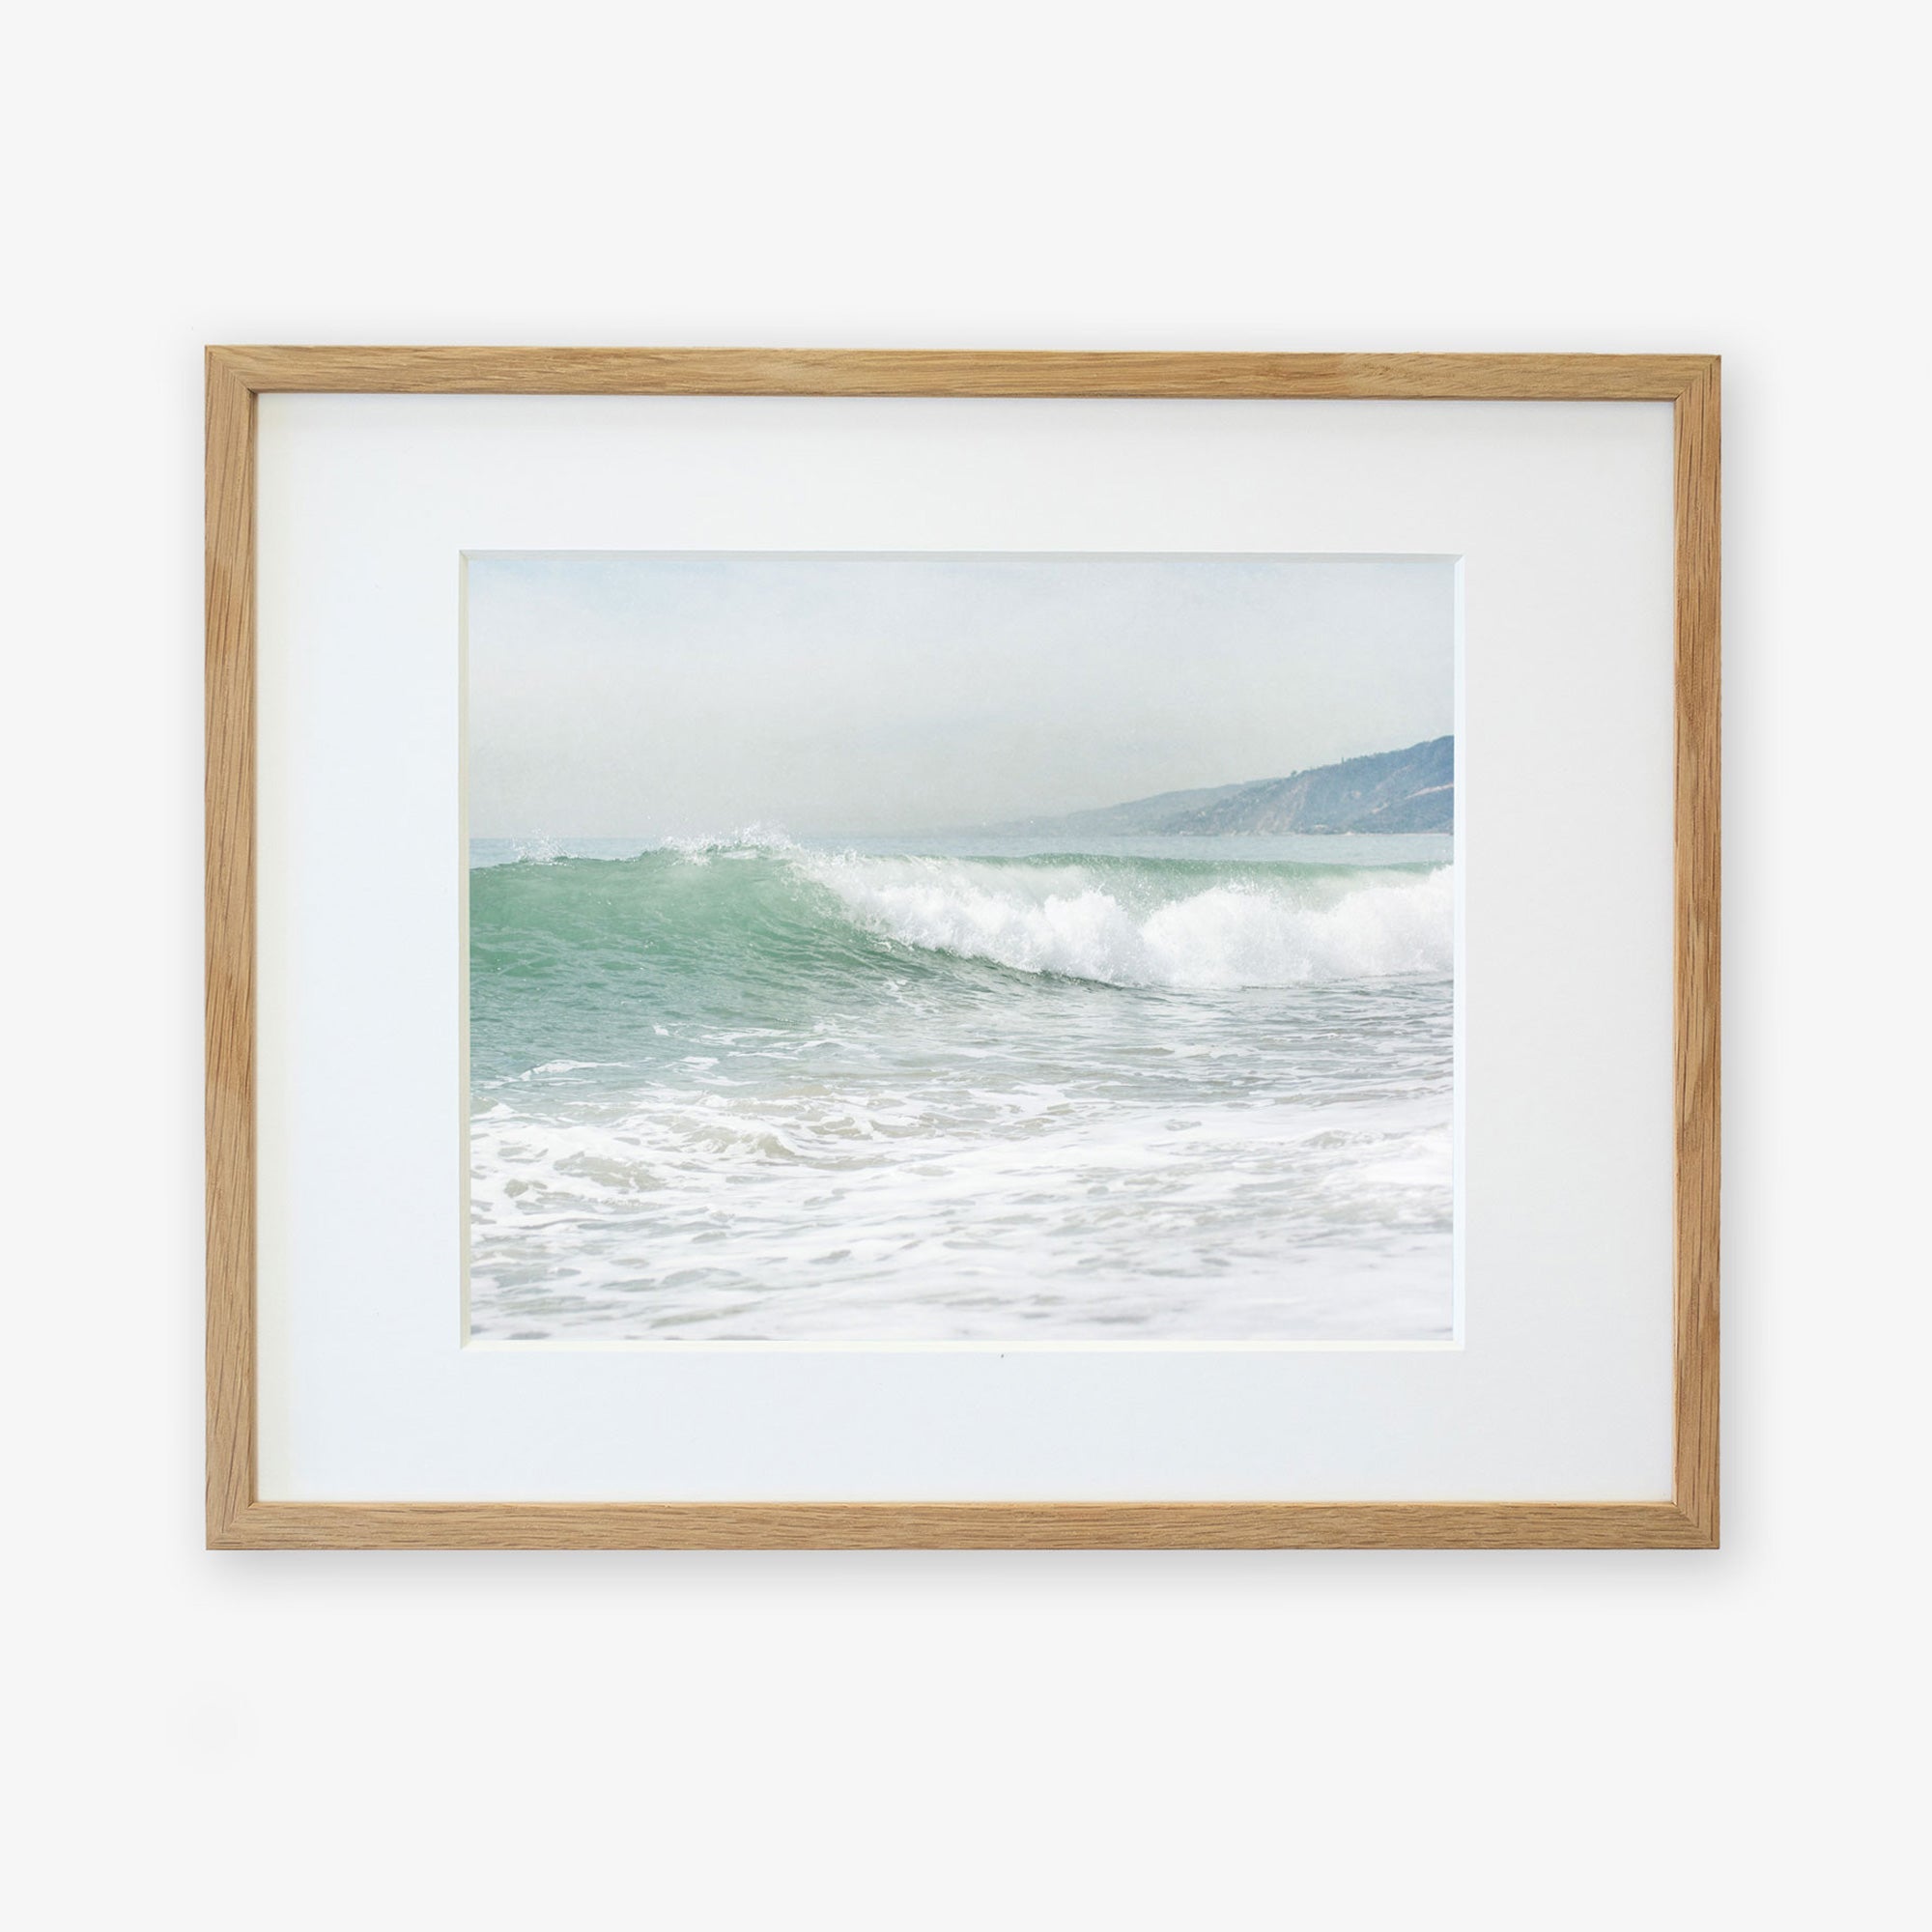 A framed photograph of a wave captured at the moment it breaks on a Southern California beach, with a foamy crest and misty backdrop, hung on a plain white wall. Offley Green&#39;s Coastal Print of a Breaking Wave &#39;Breaking Surf&#39;